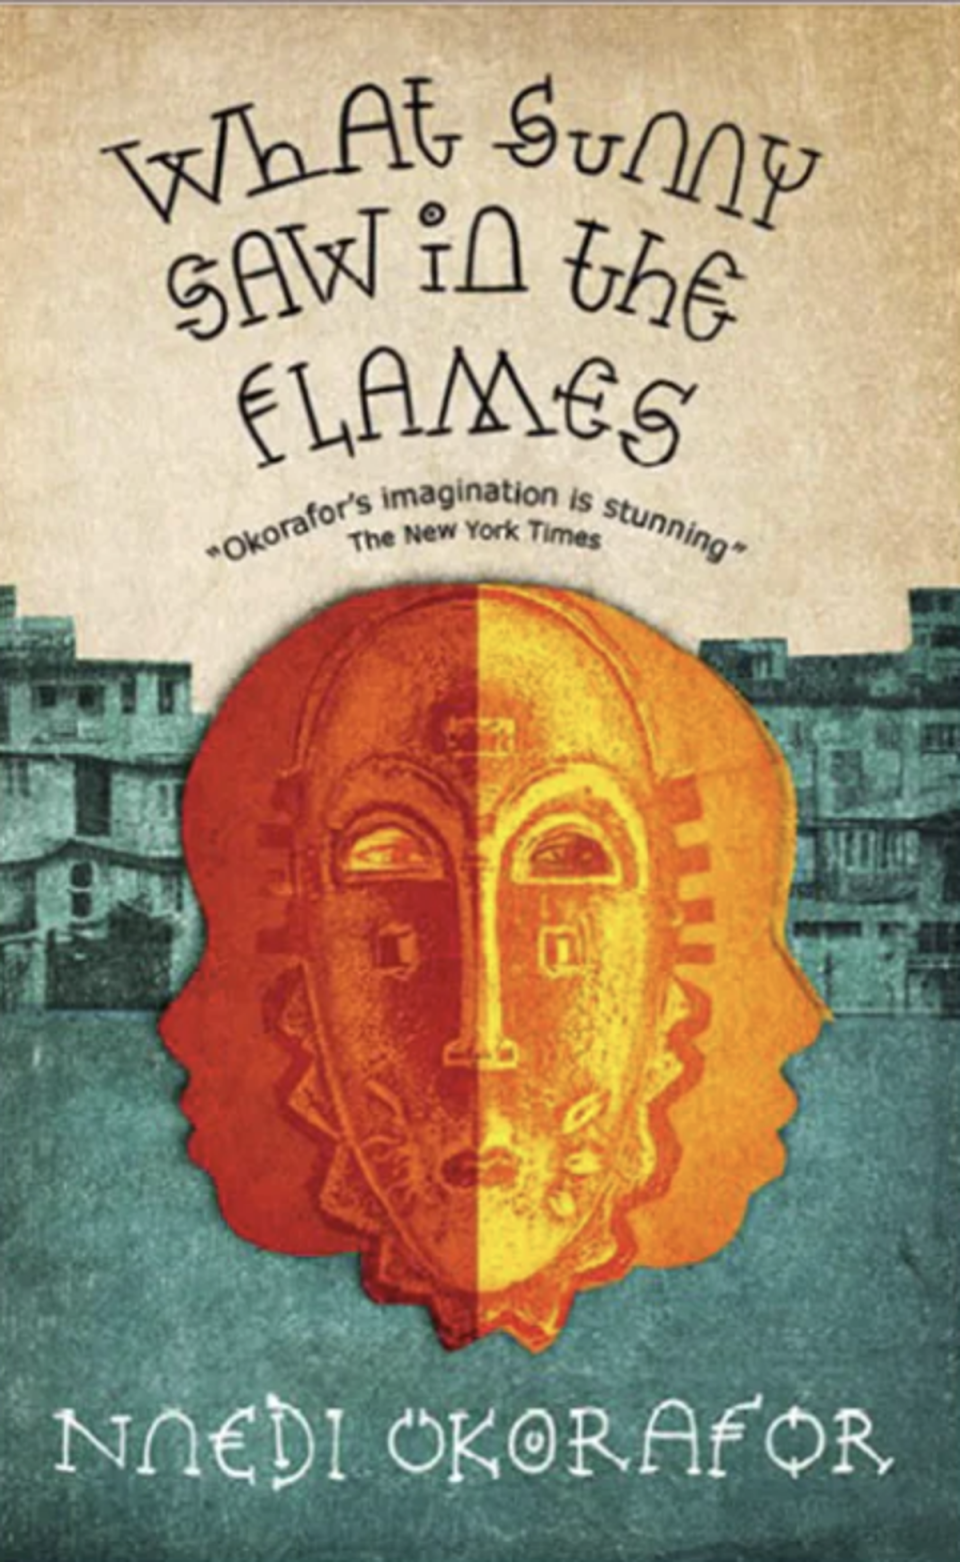 ‘What Sunny Saw in the Flames’ (Cassava Republic Press)